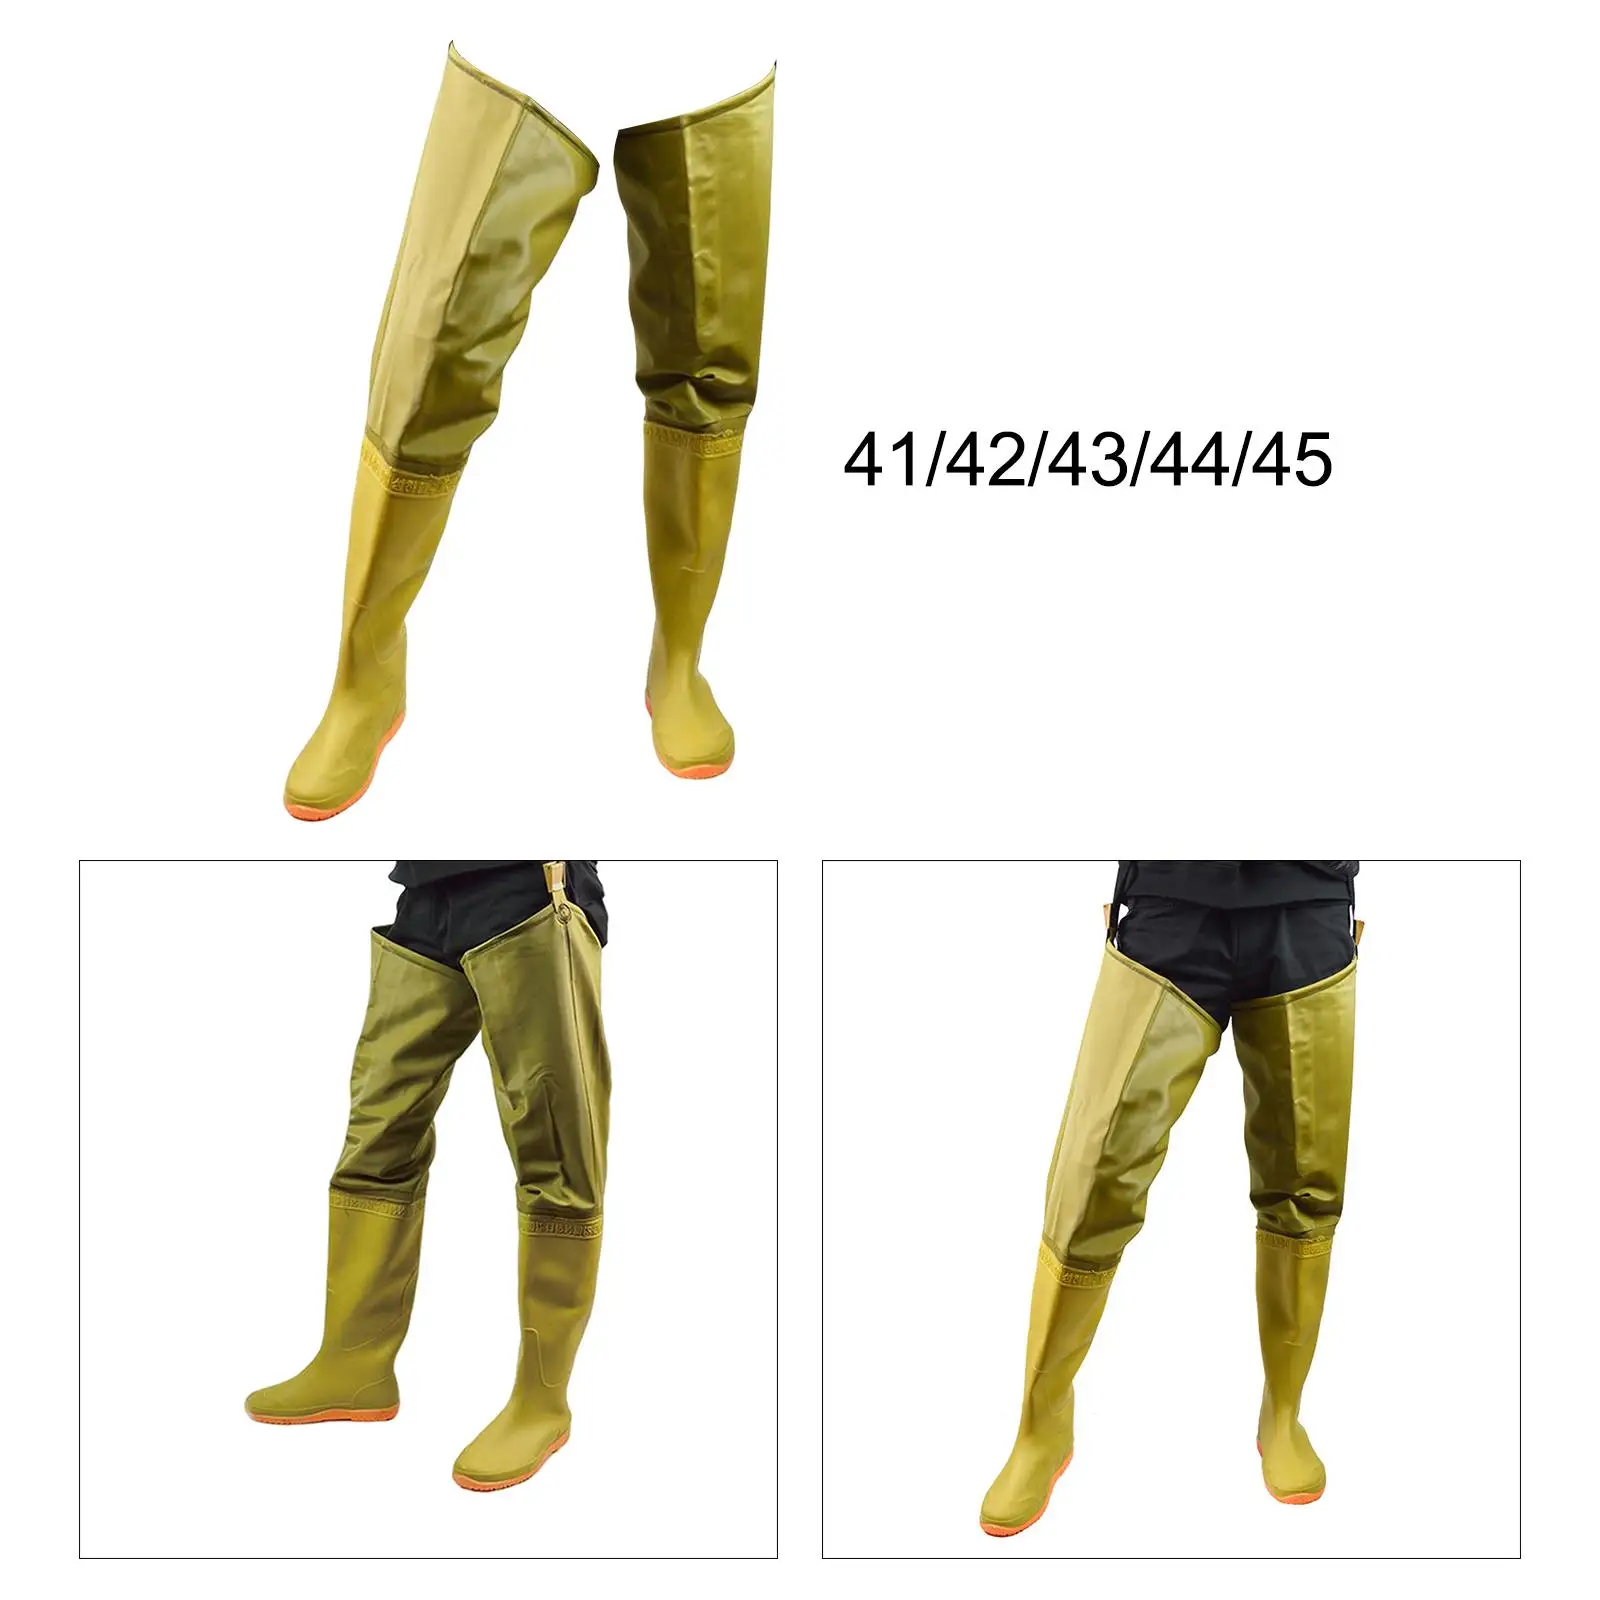 Fishing Hip Waders Watertight Hip Boots with Buckle Boots Bootfoot Water Pants Rain Boot Nylon Fishing Waders for Muck Work